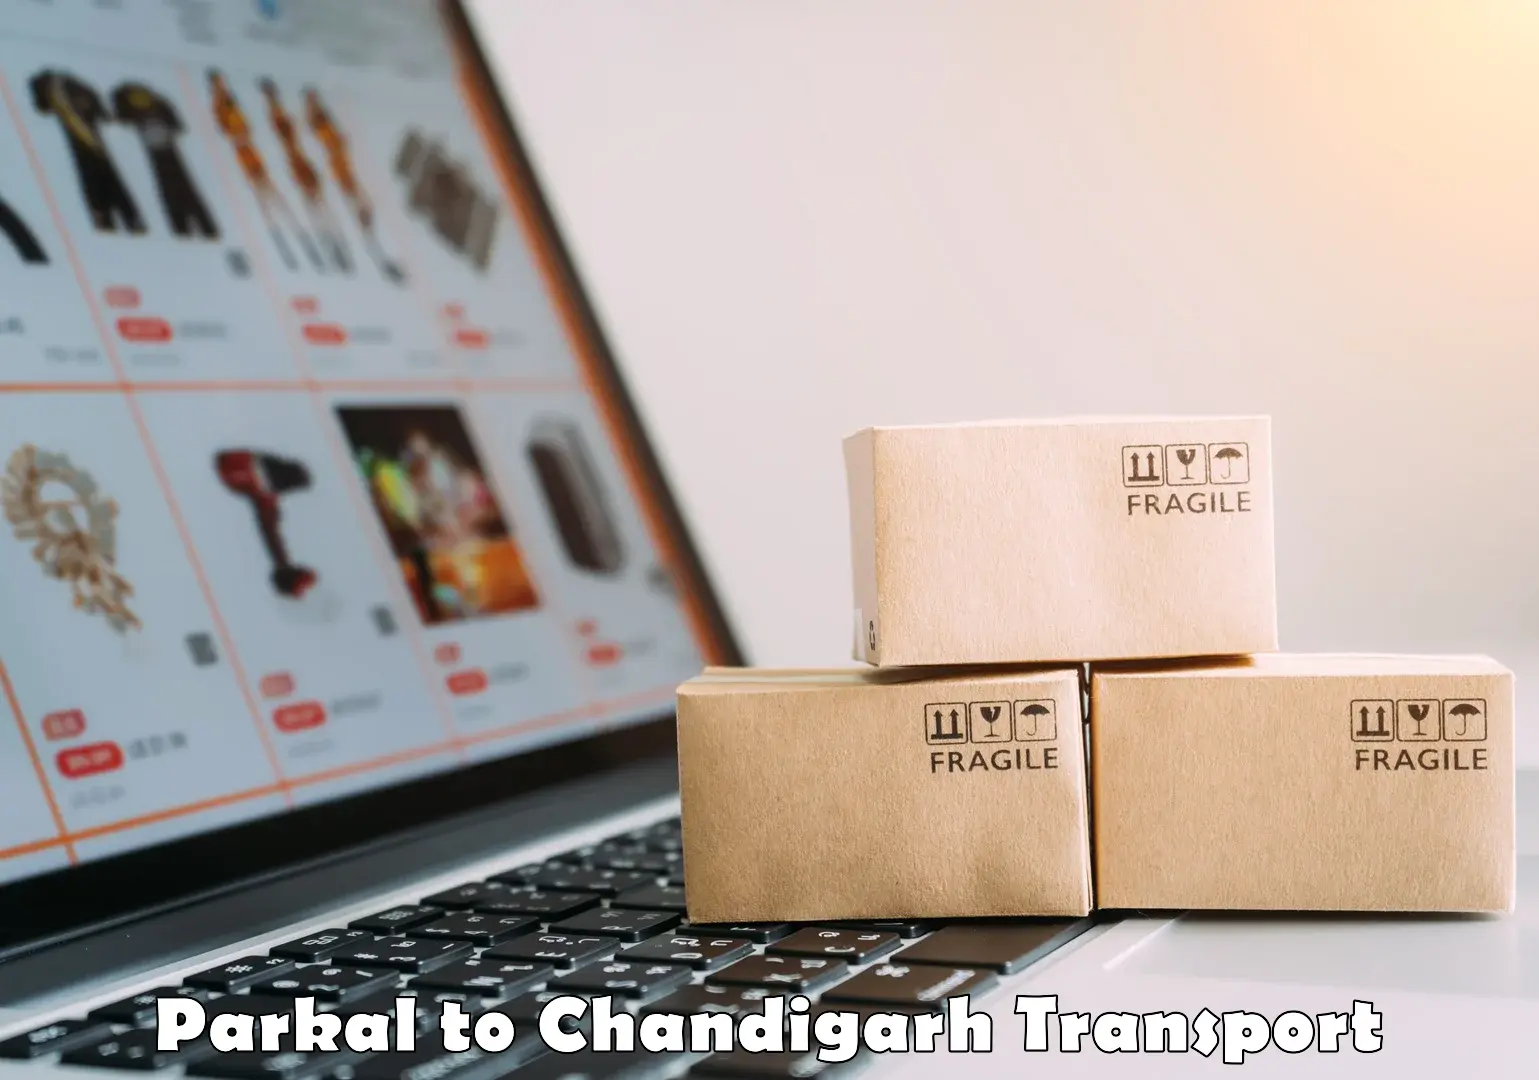 Commercial transport service Parkal to Chandigarh